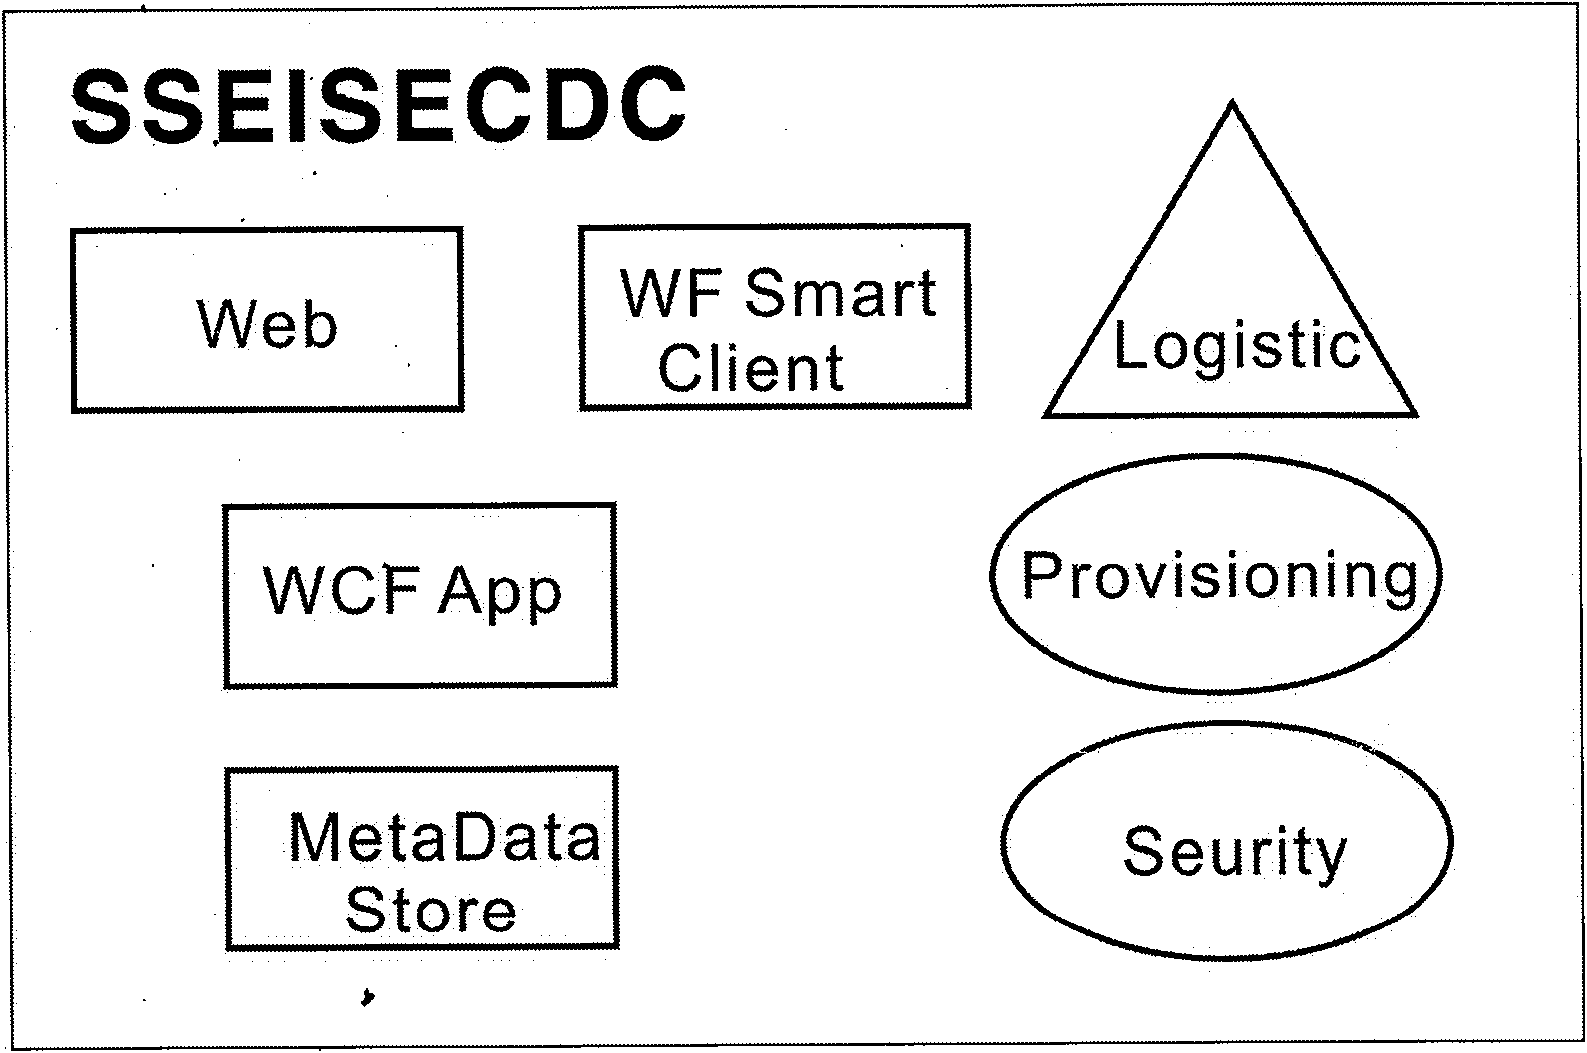 Enterprise cluster distributed cooperative operation system